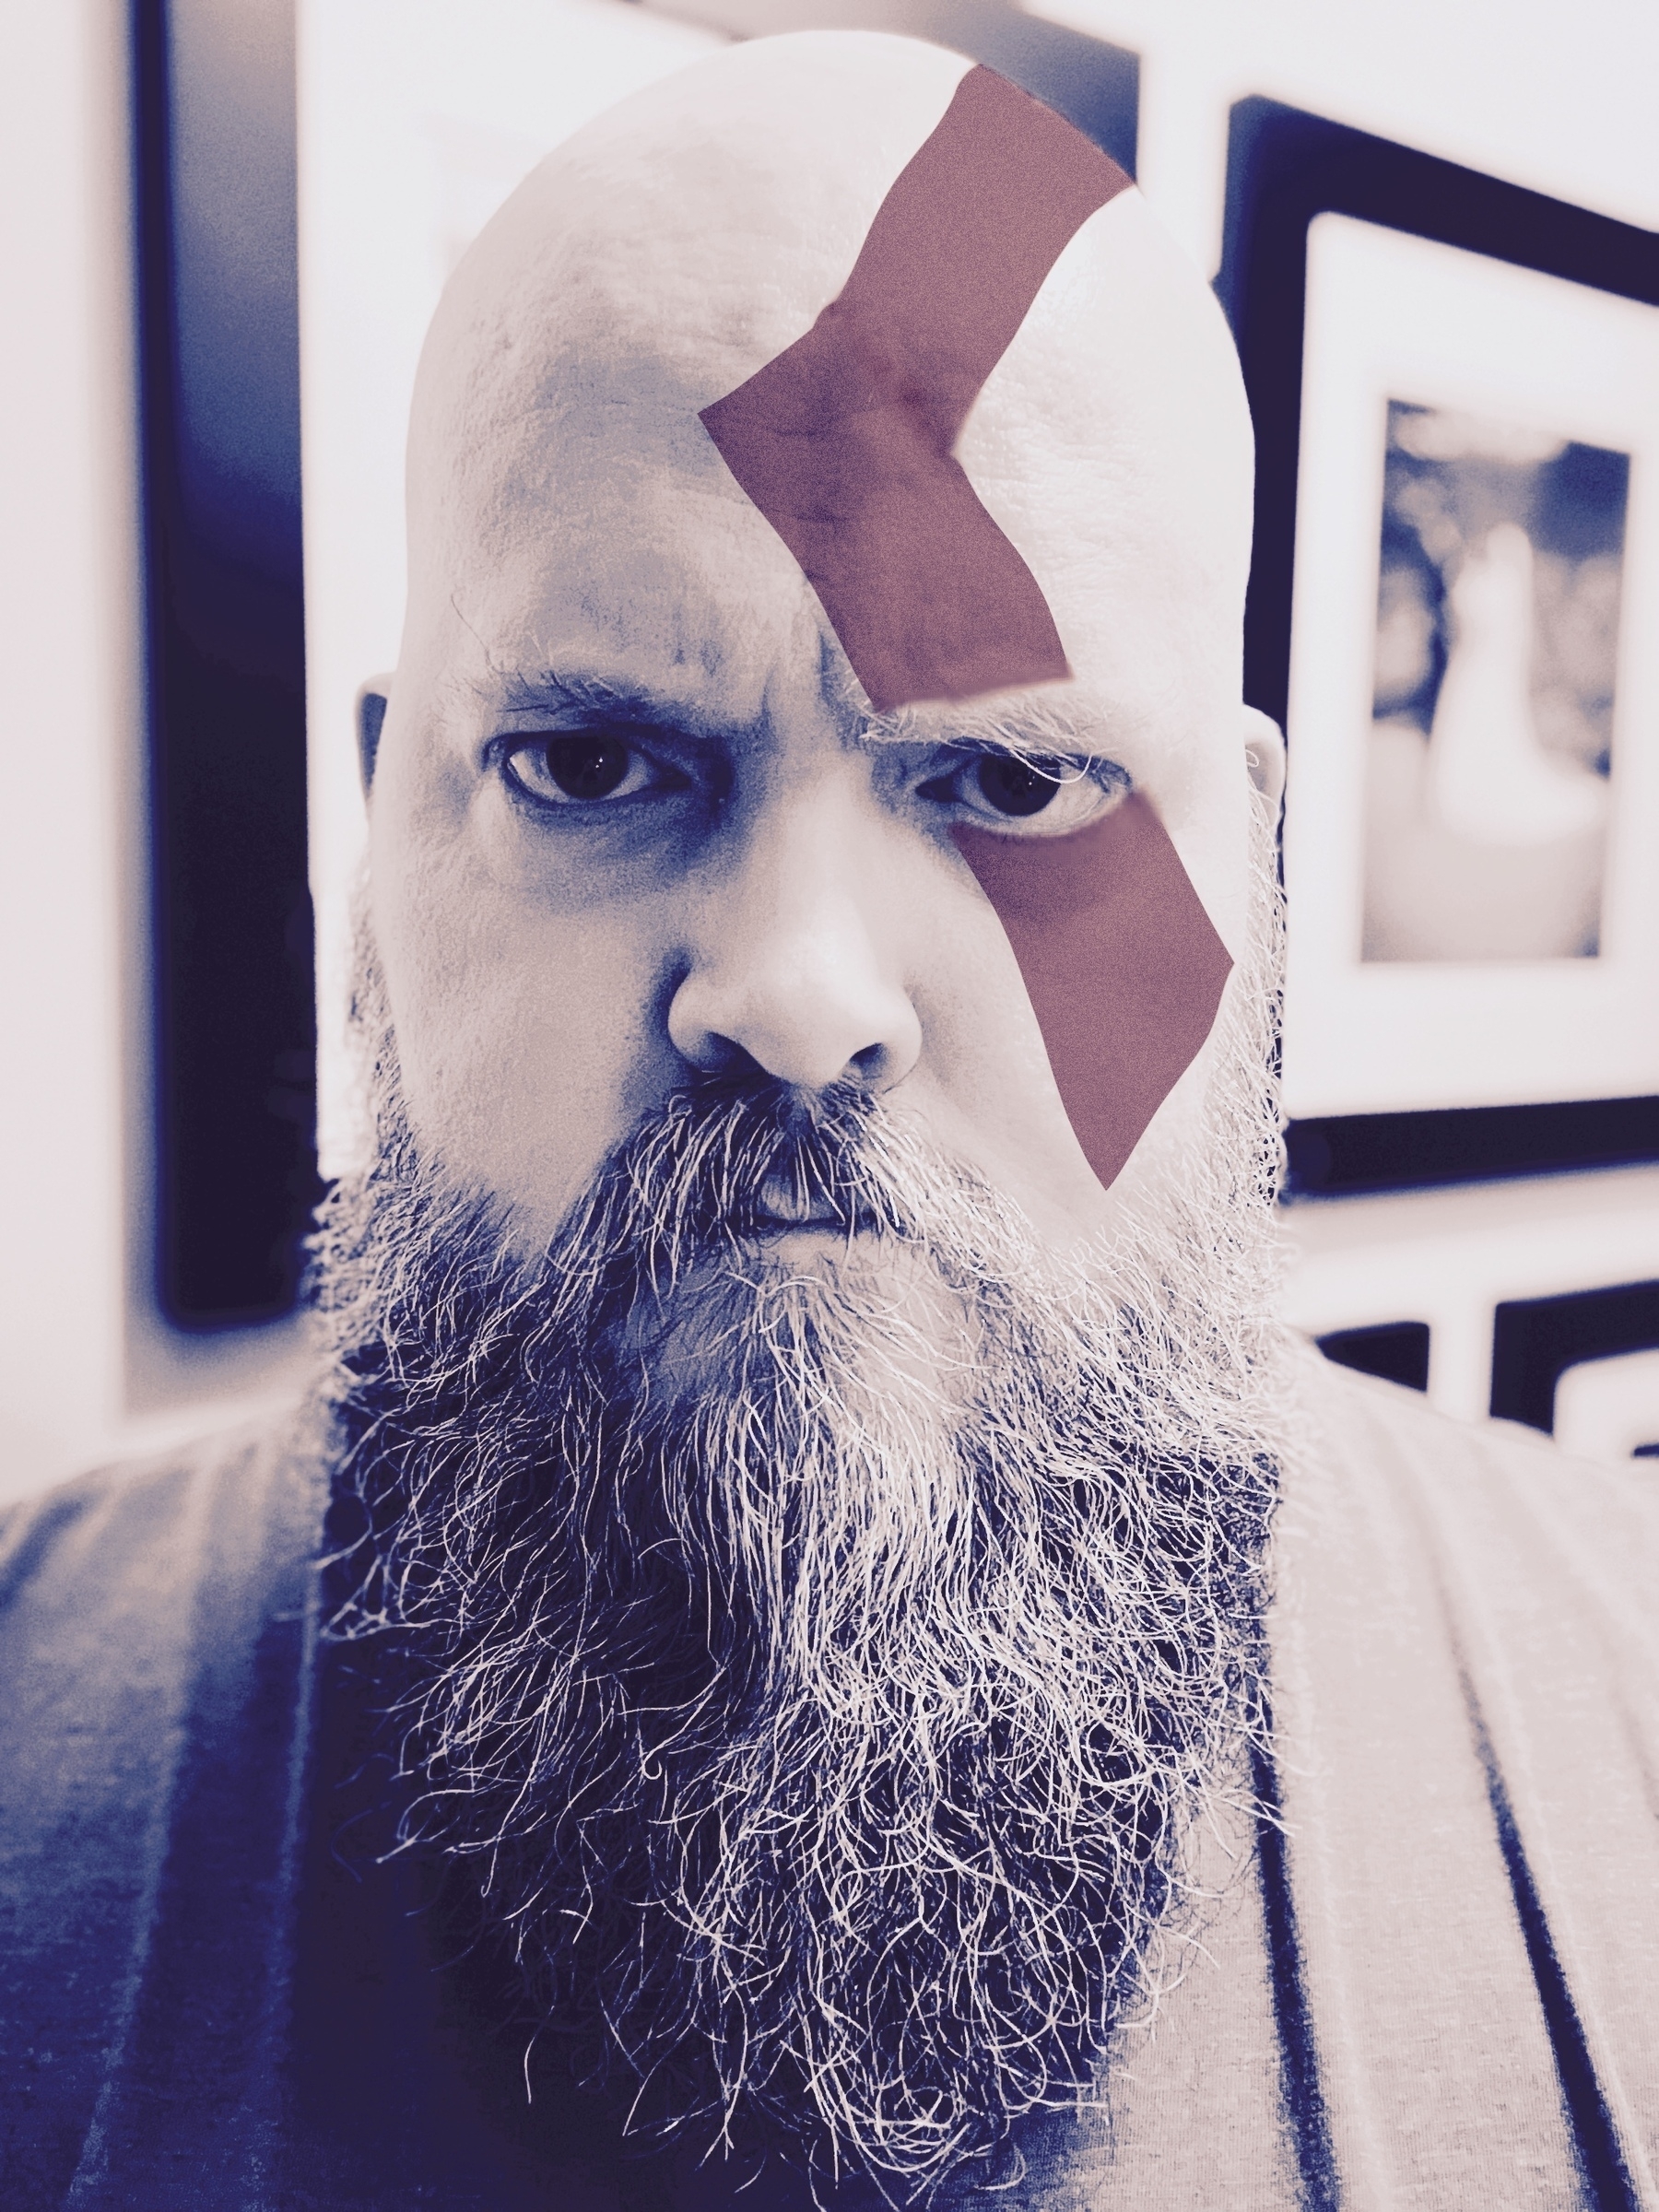 Portrait of me with a beard in the style of Kratos, from the God Of War video game. My head is shaved clean (of course), and I've digitally added the dark red stripe of face paint on my face to match Kratos as well.